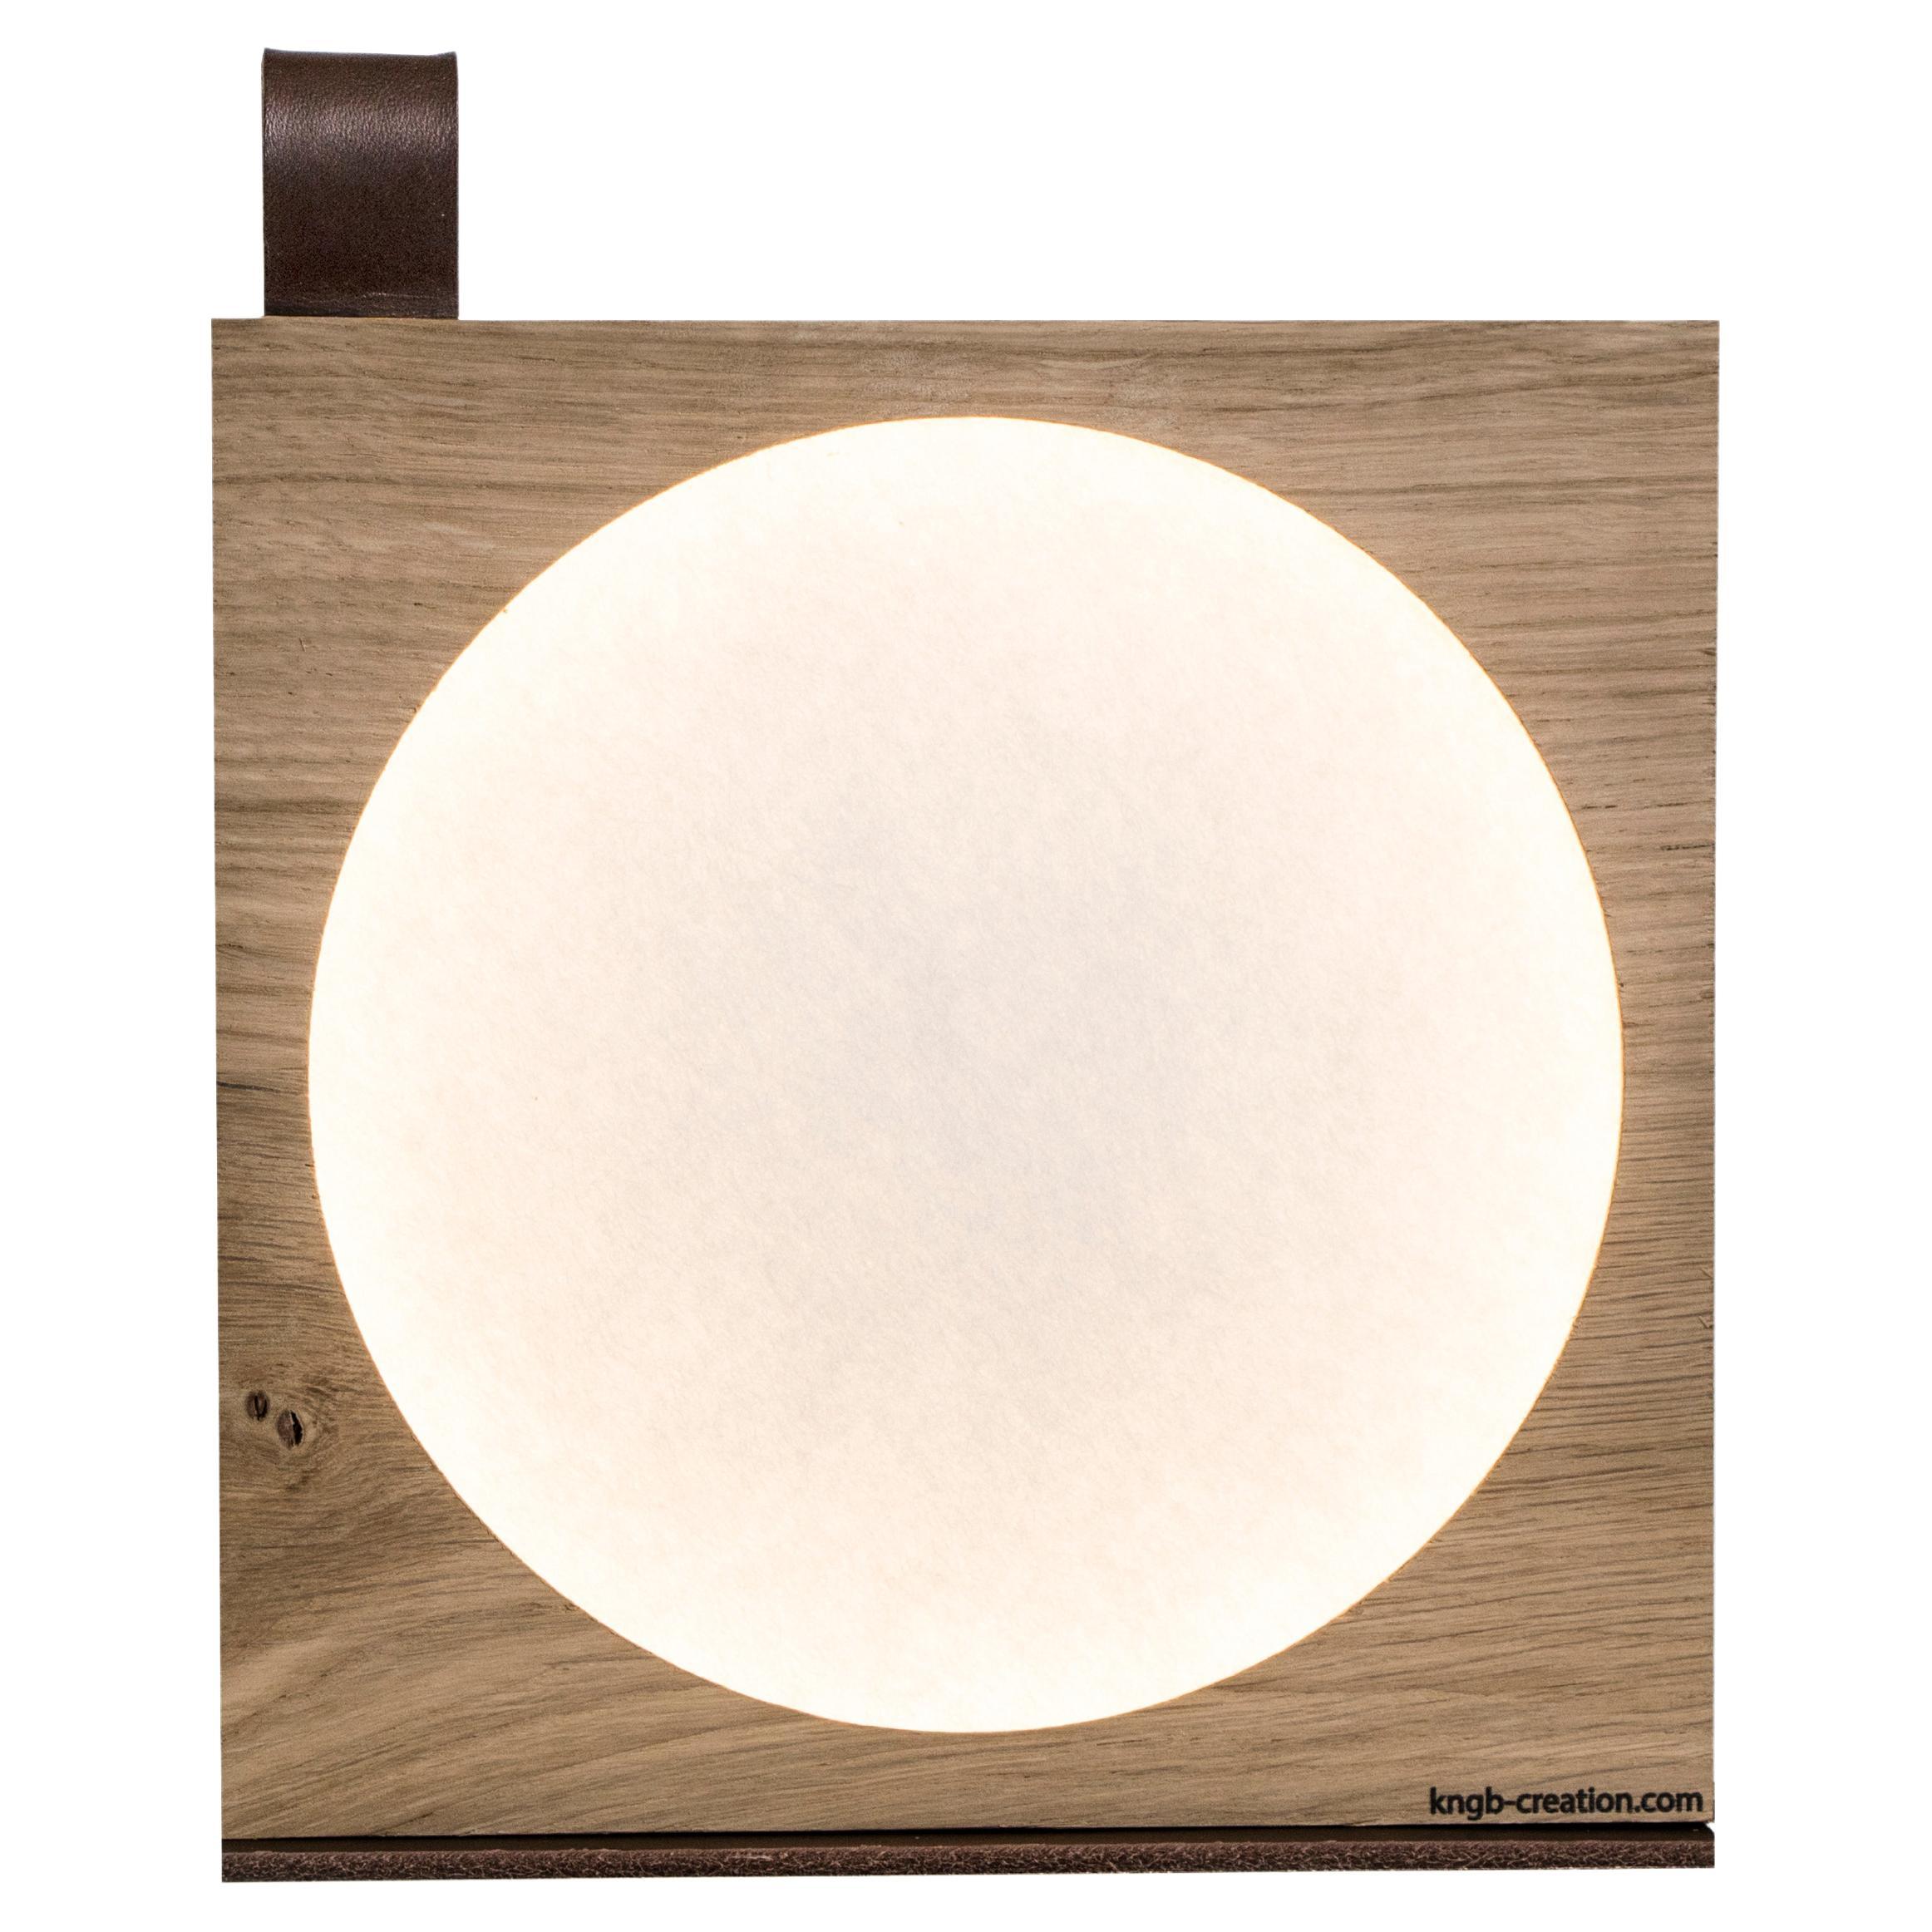 Moon Table Lamp by KNGB